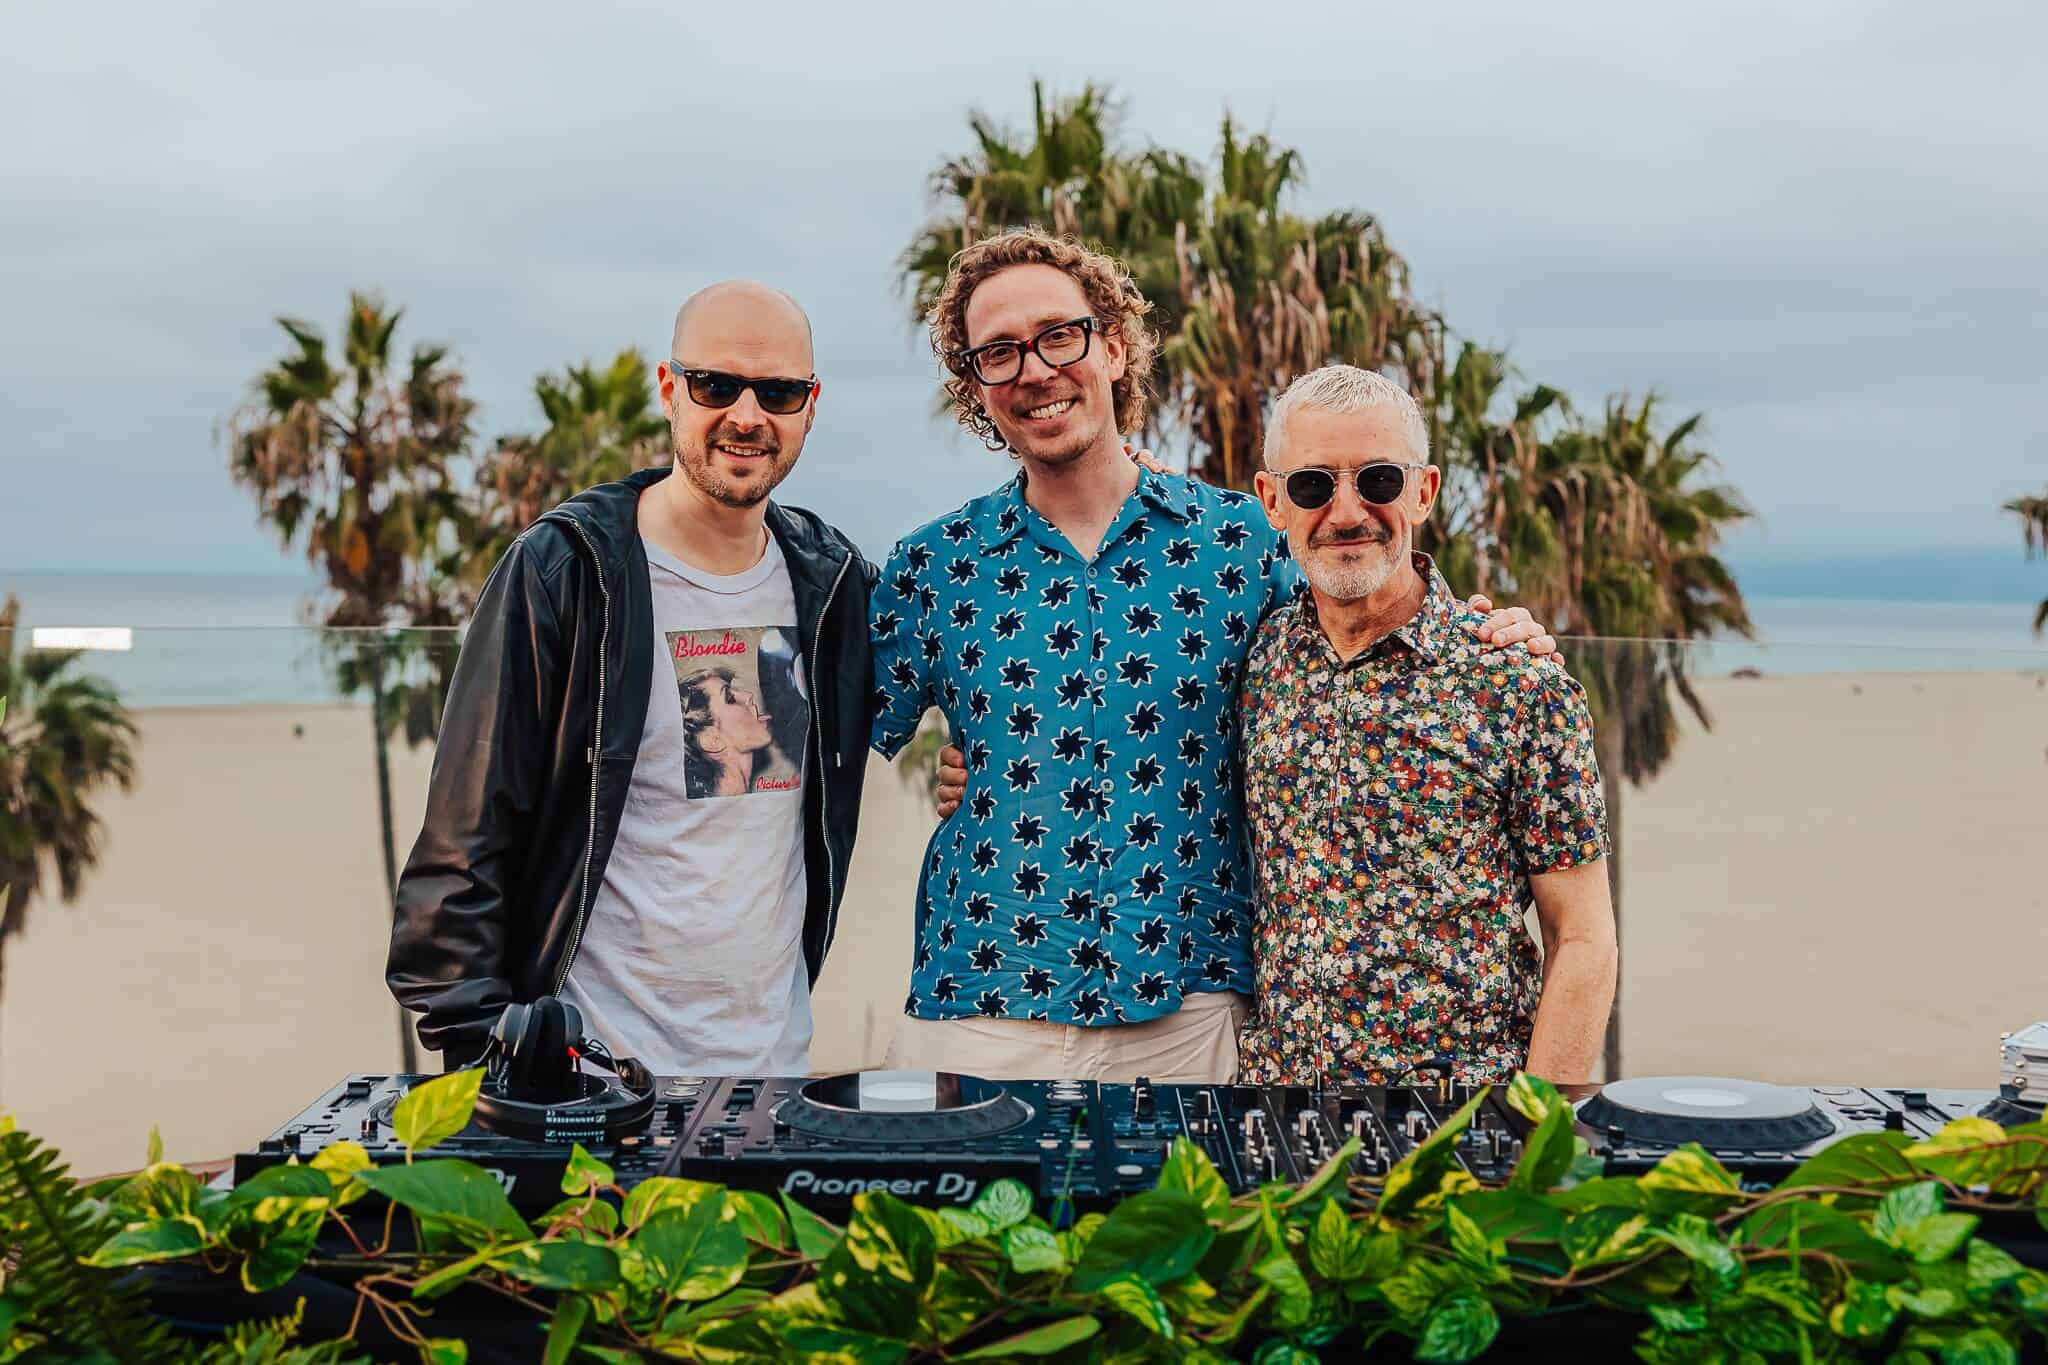 Above & Beyond reveal second track ‘500’ from upcoming EP: Listen